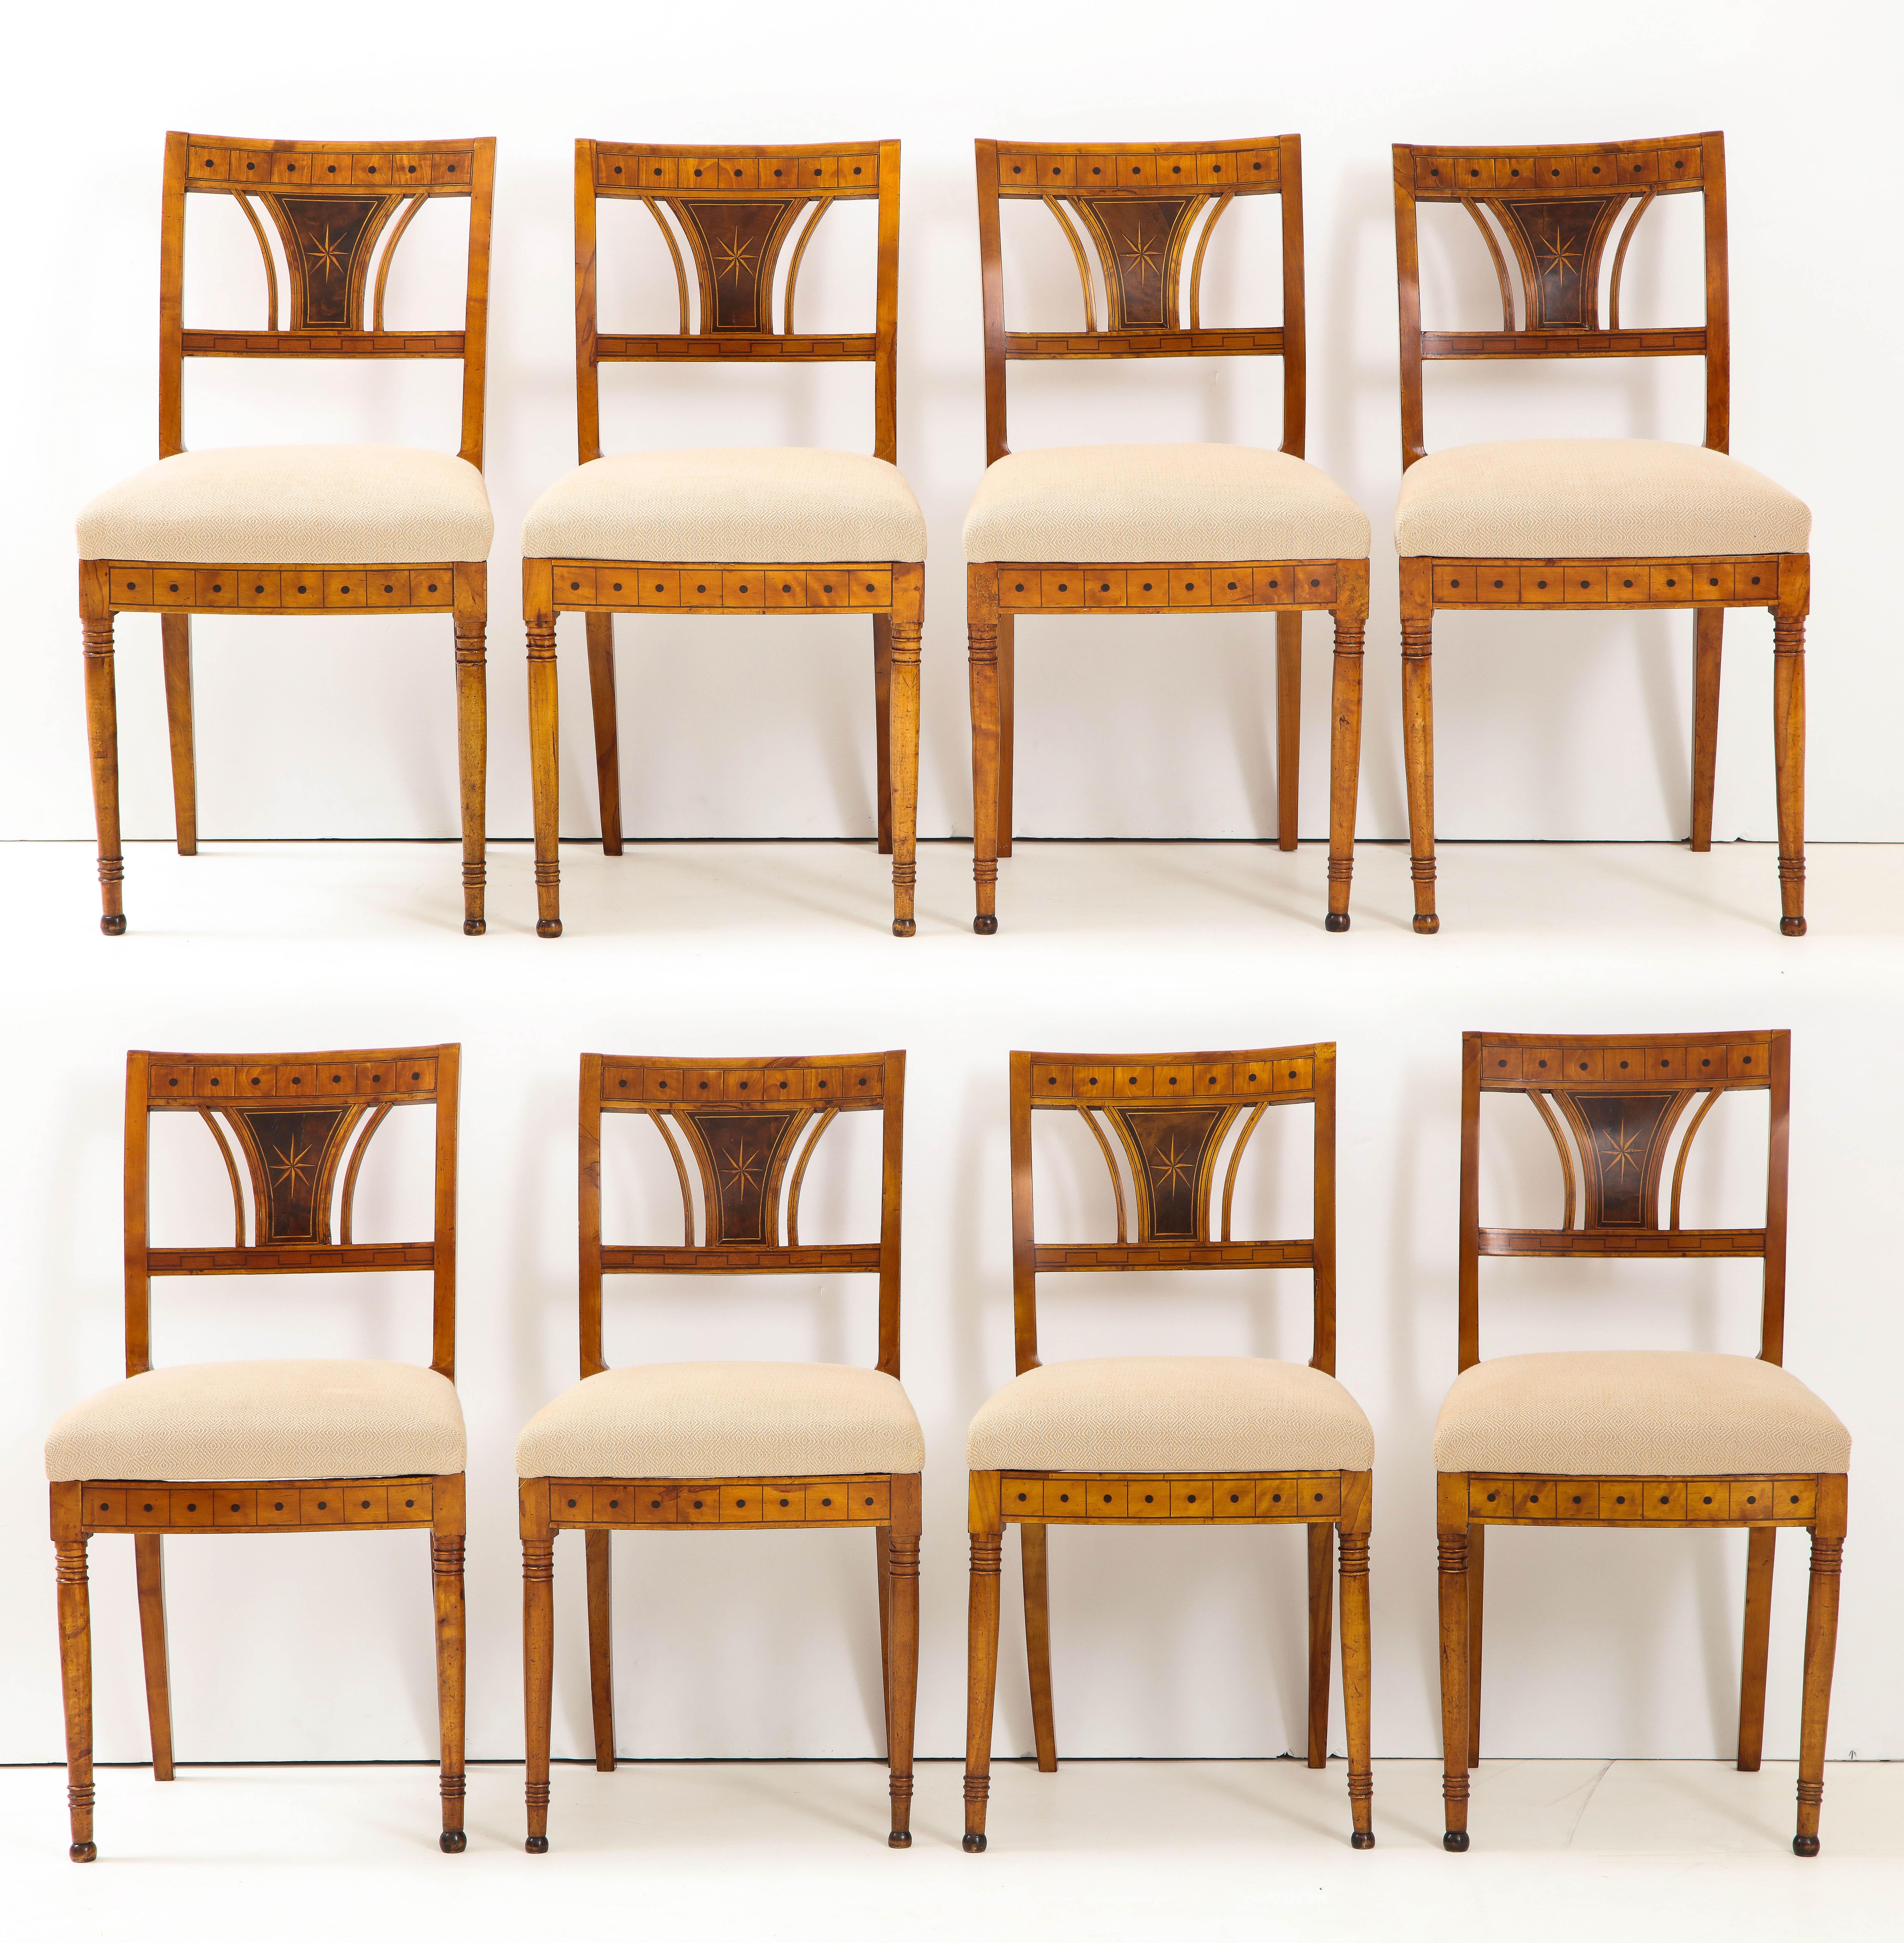 A good set of eight Danish Empire inlaid birchwood sidecars, circa 1810-1820, each with a rectangular backrest, upholstered seats and raised on circular tapered legs. Geometric mahogany and ebony inlays throughout. Previously with cane seats now